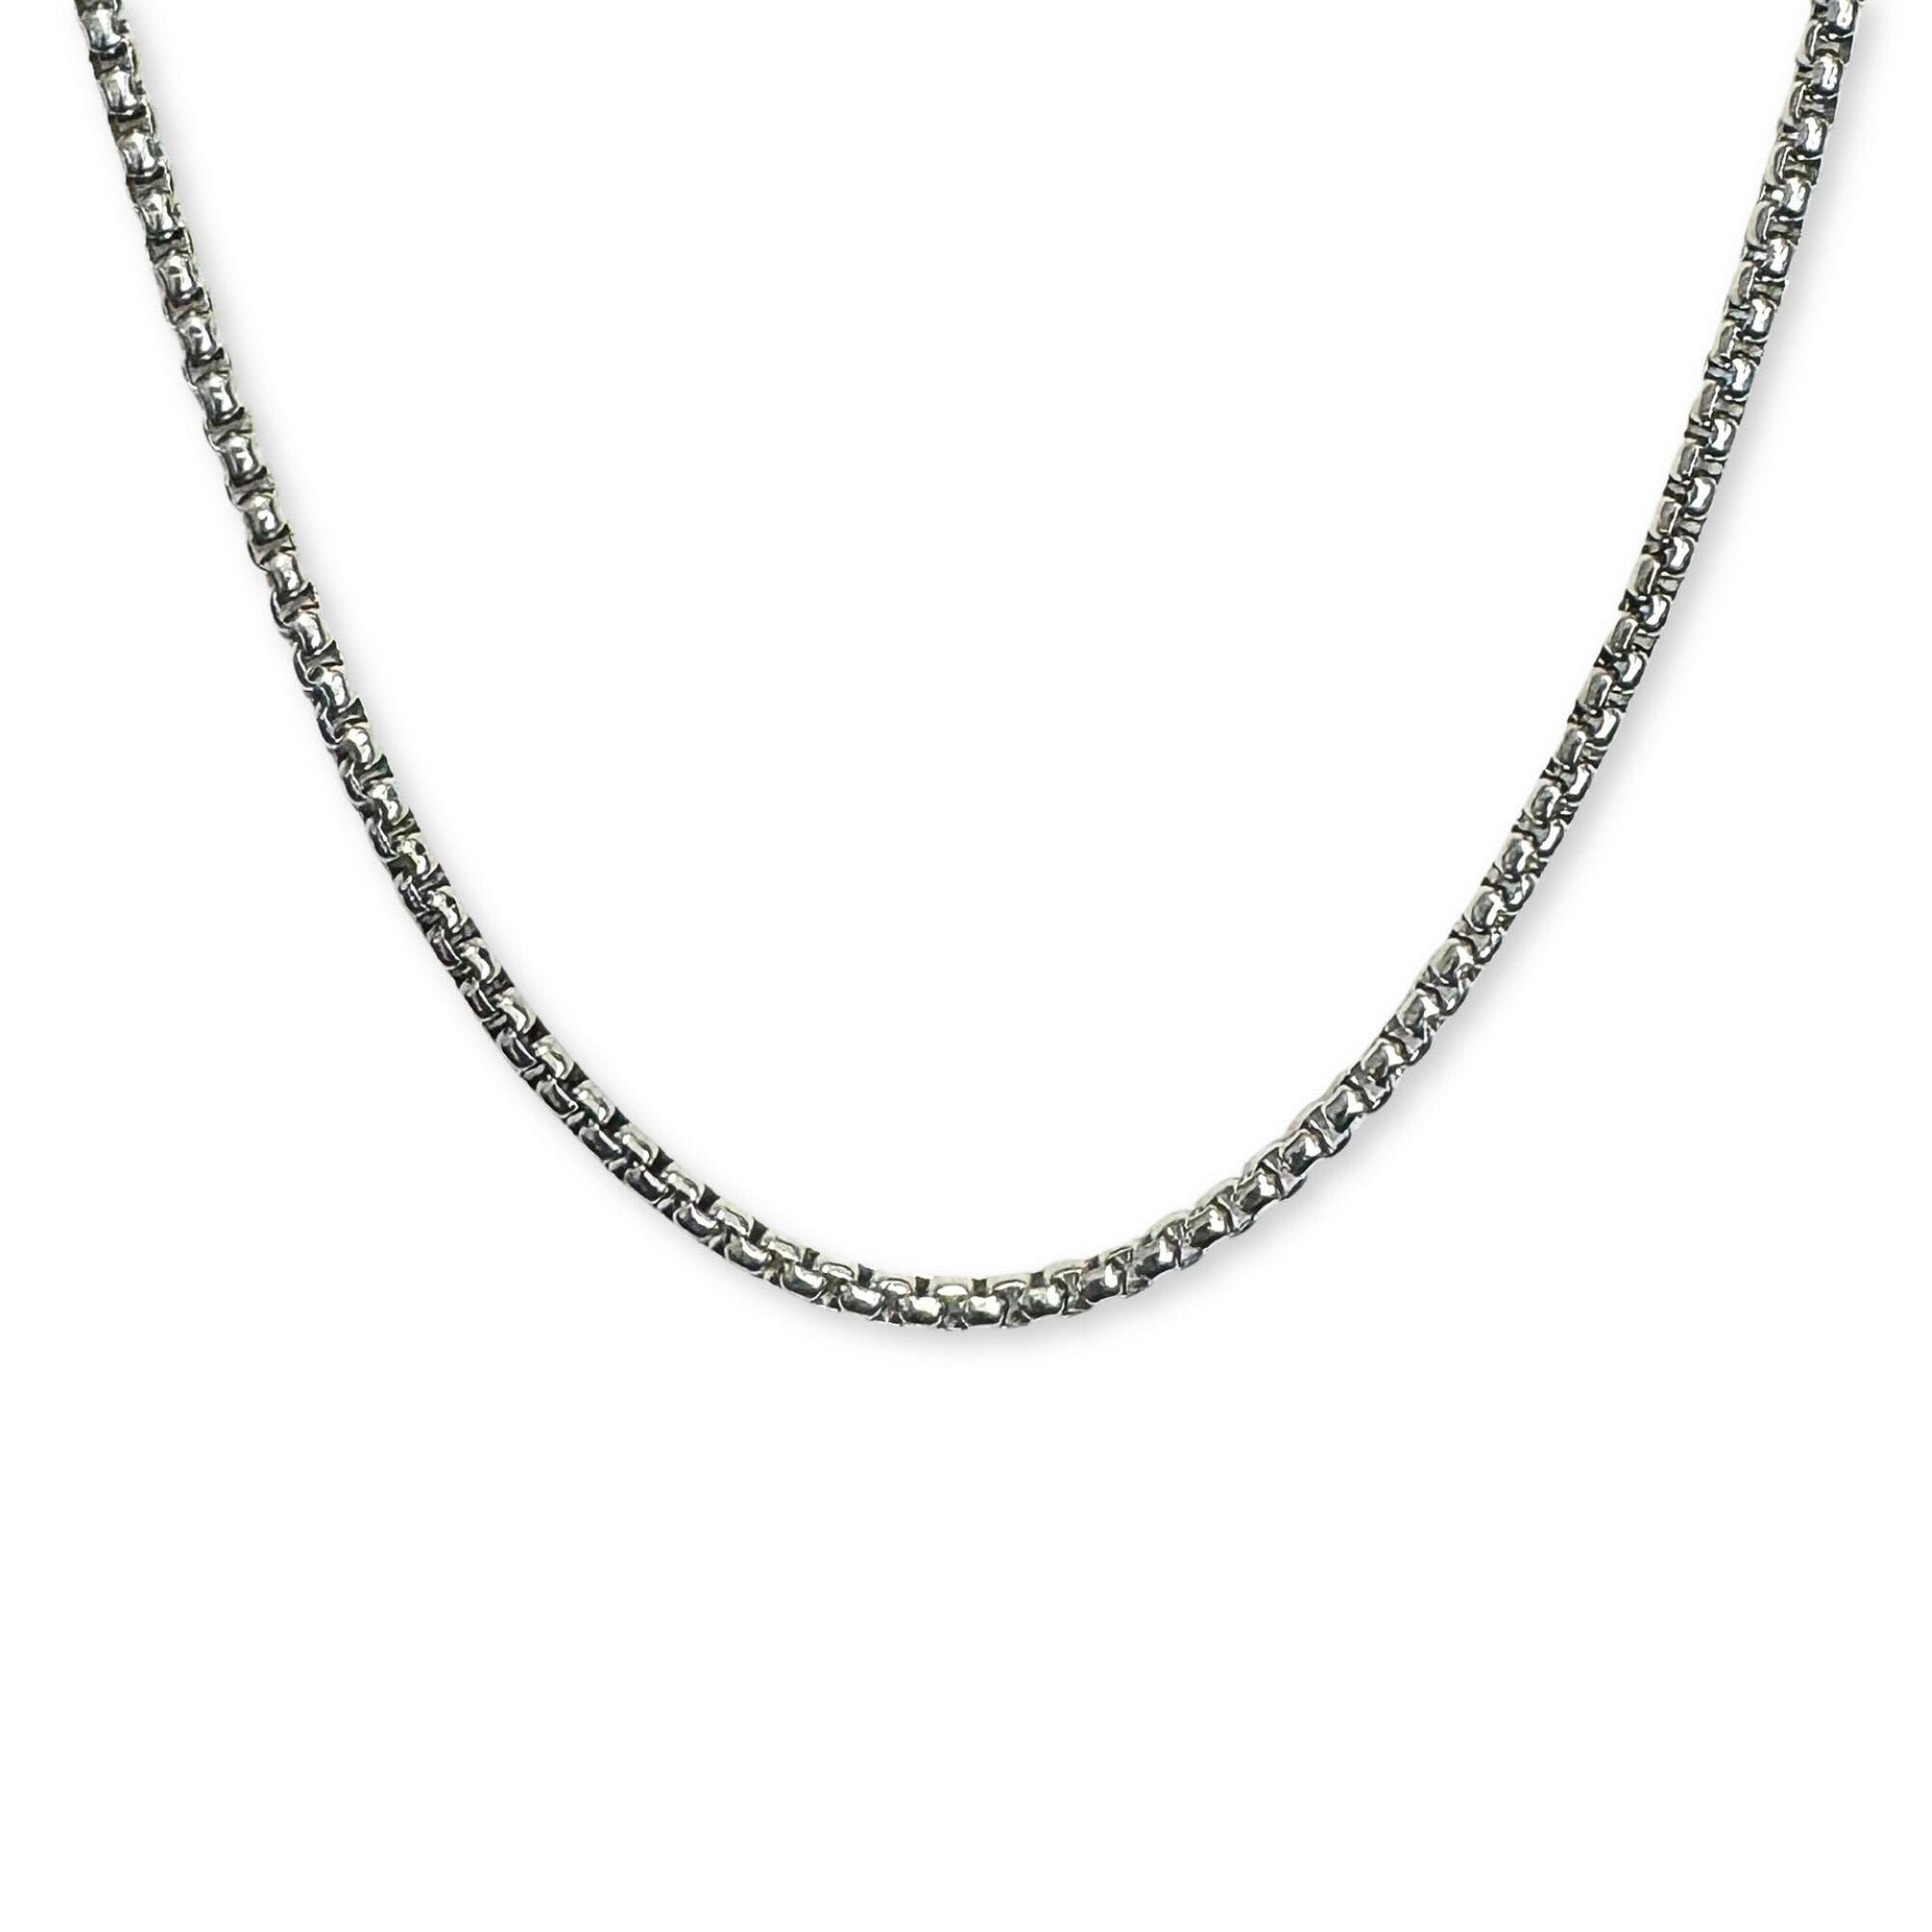 Silve chain necklace